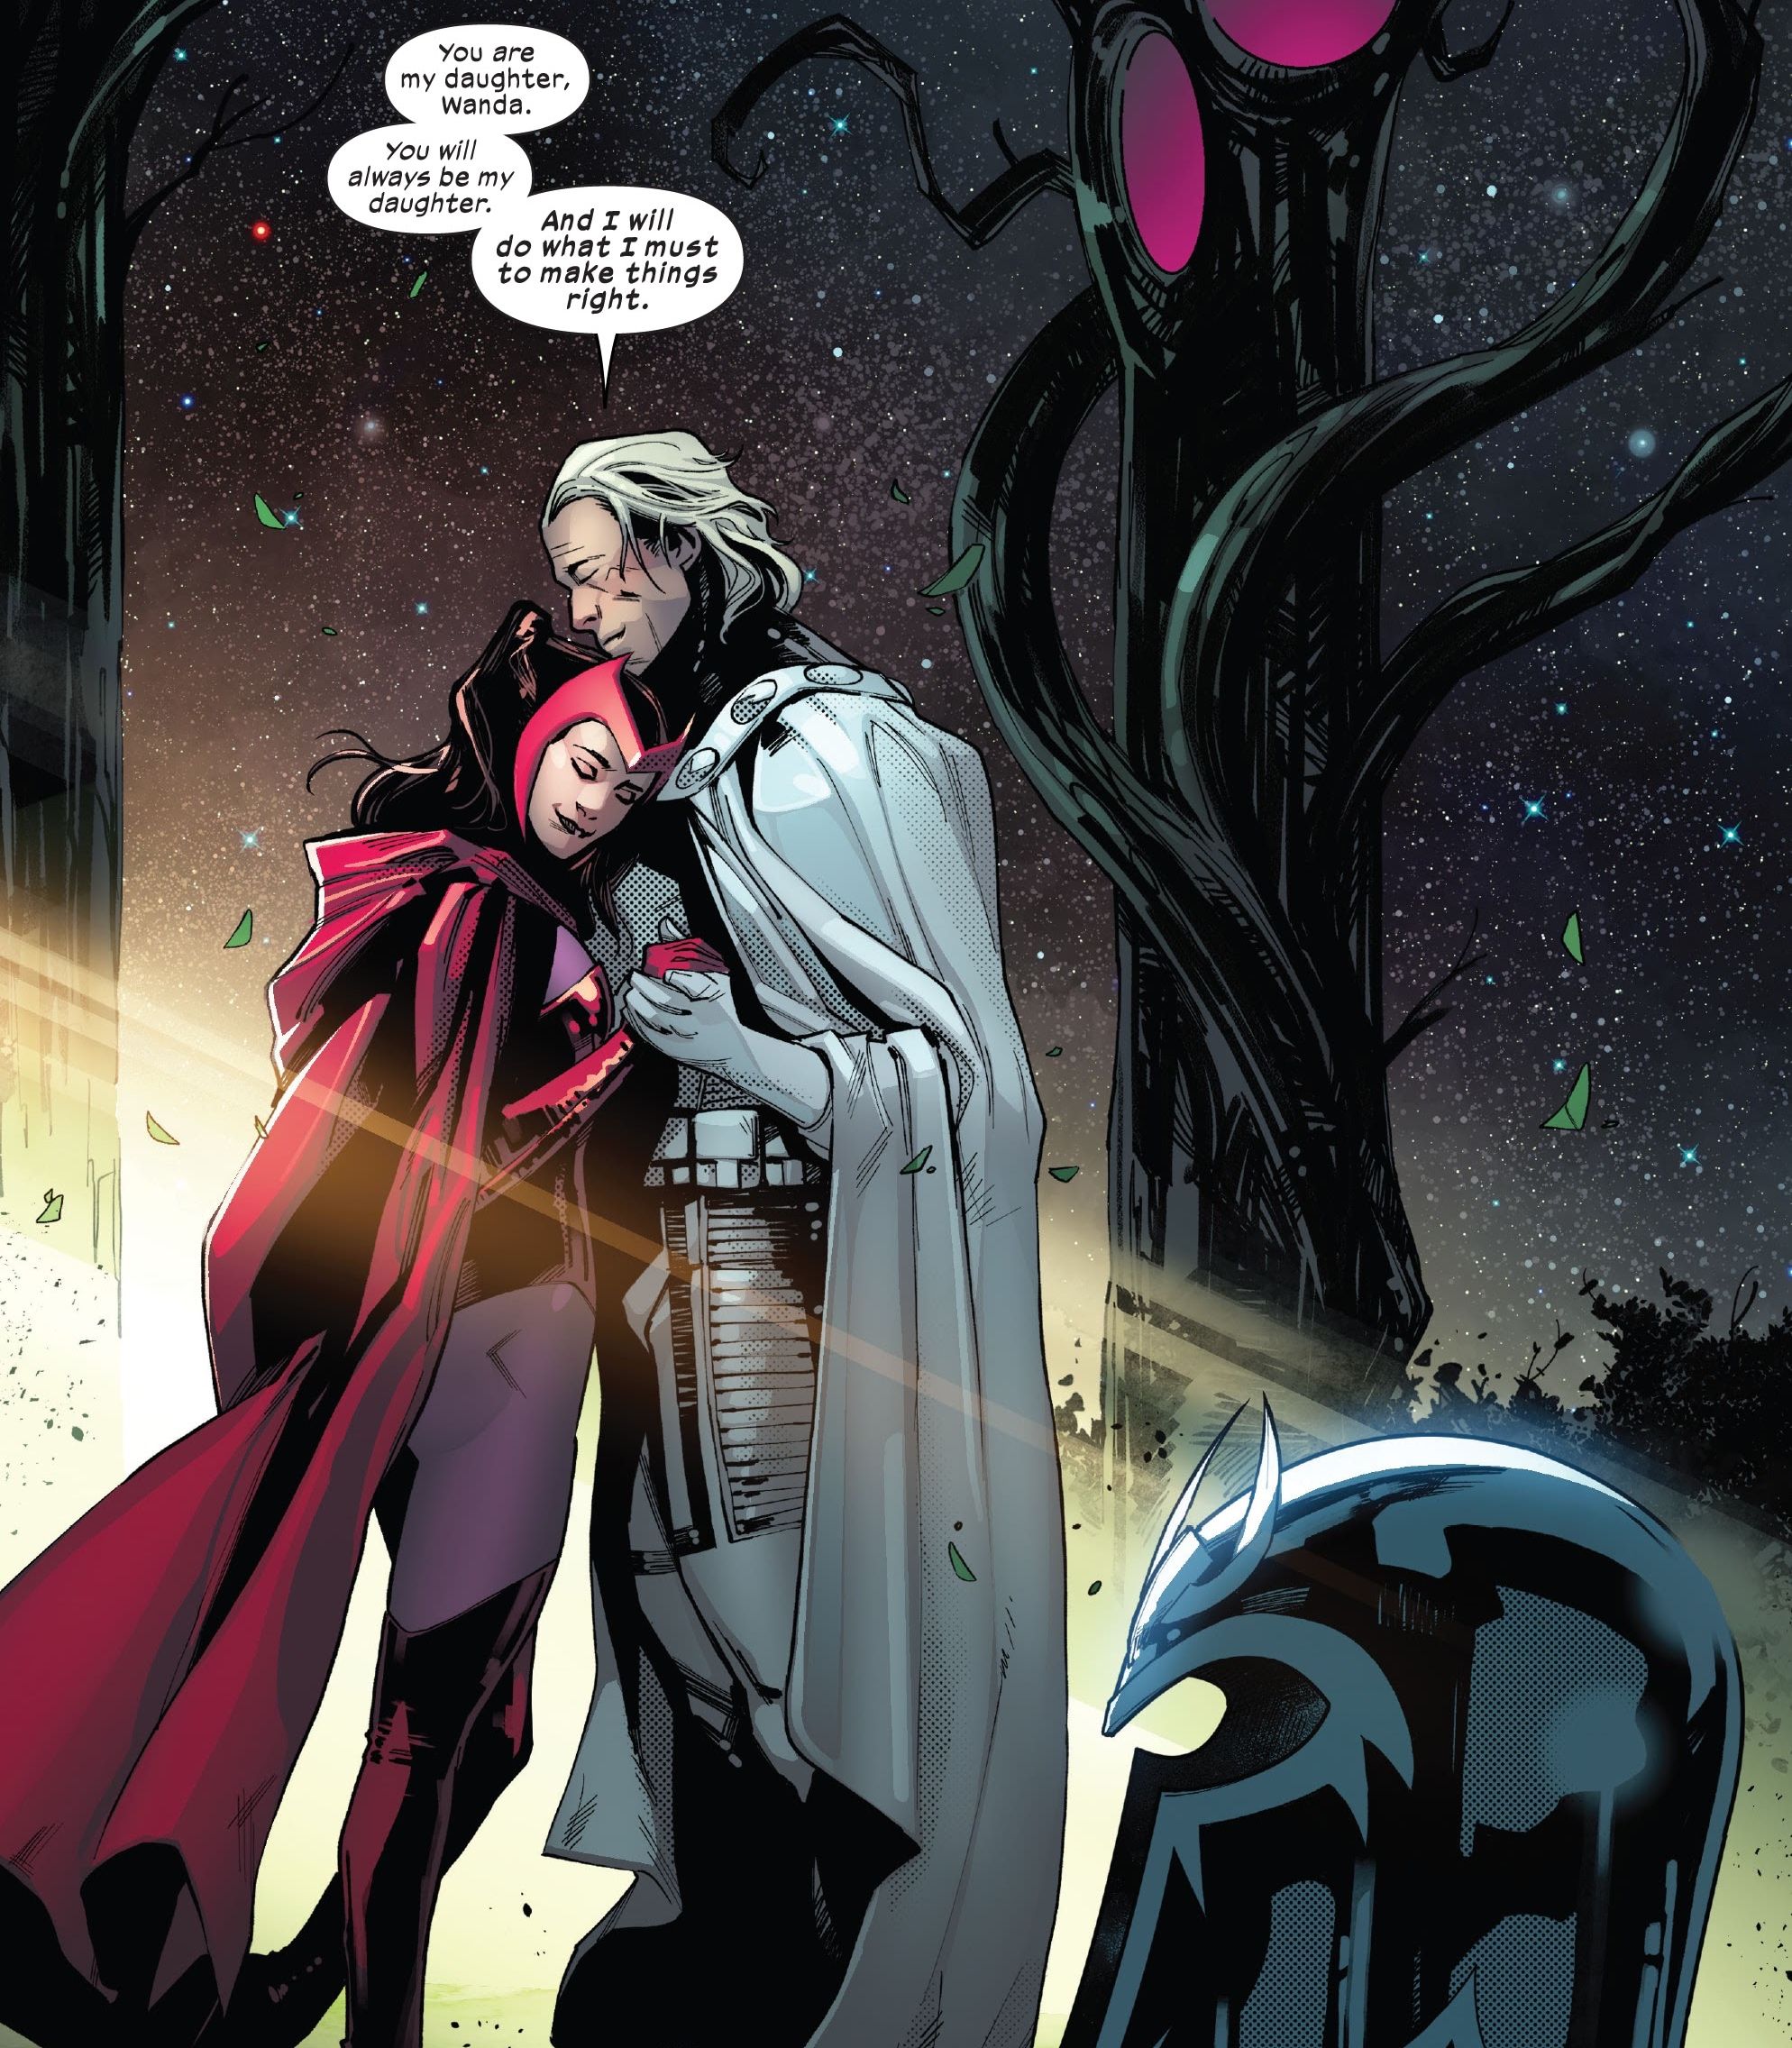 SWORD-6-Magneto-Scarlet-Witch-Reunion-Vertical